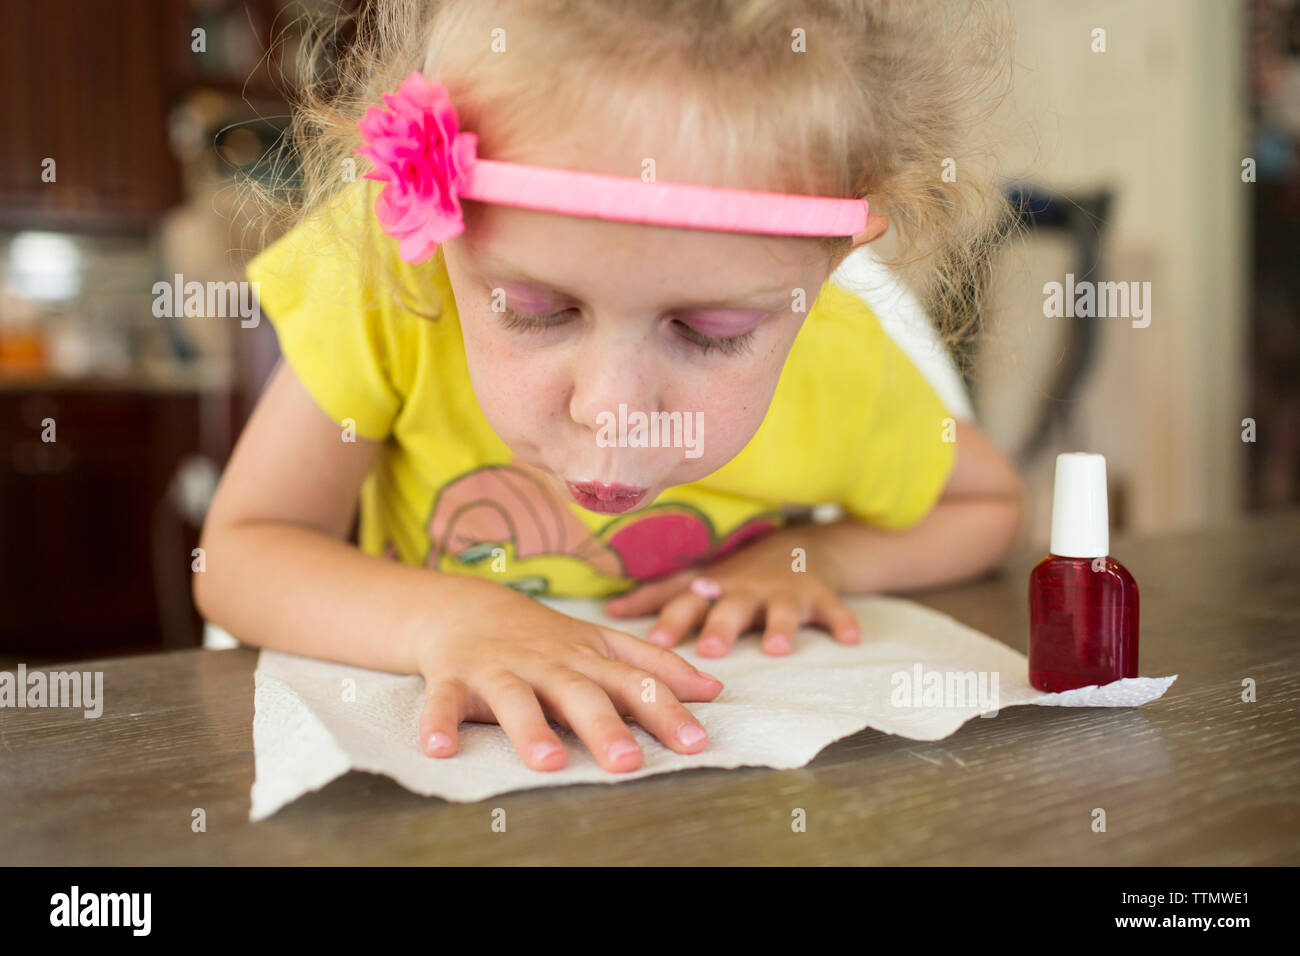 Girl painting fingernails at home Stock Photo